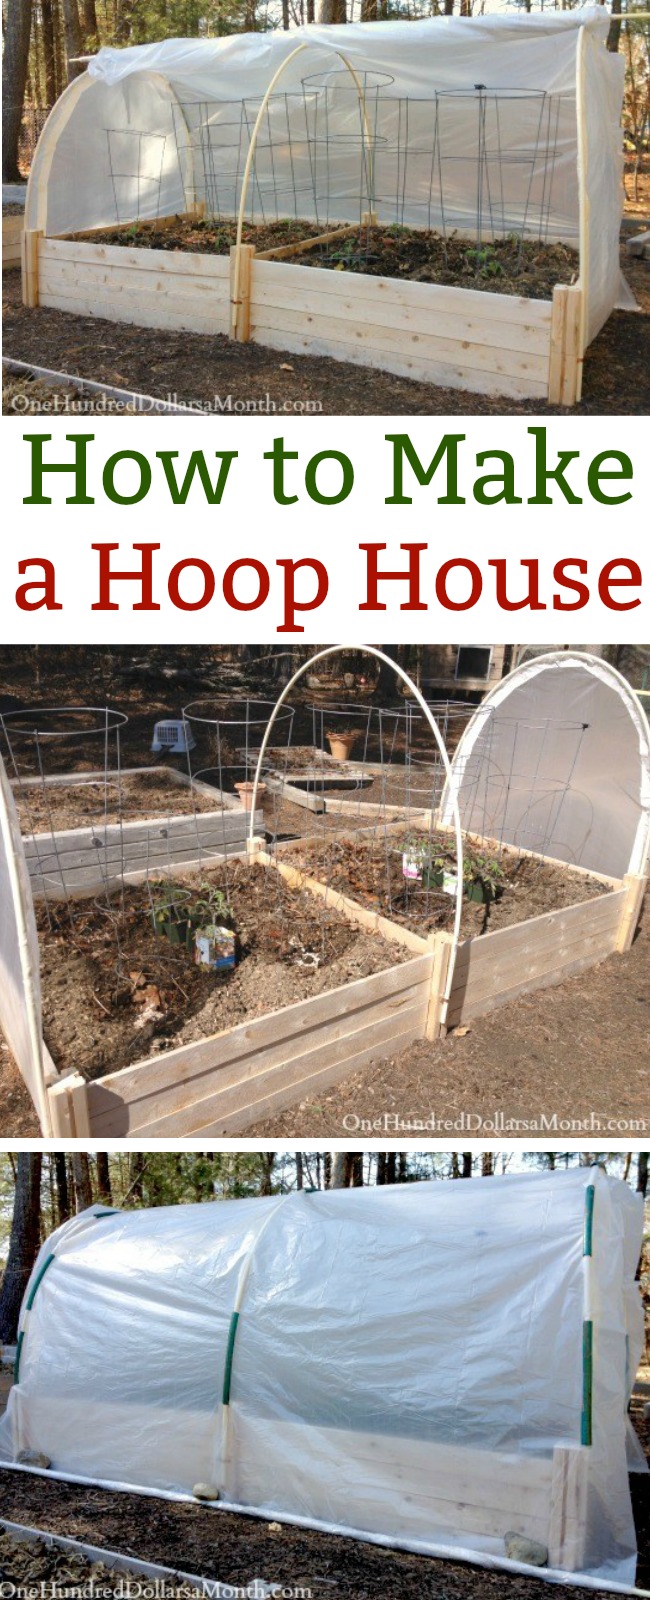 How to Make a Hoop House – Picture Tutorial